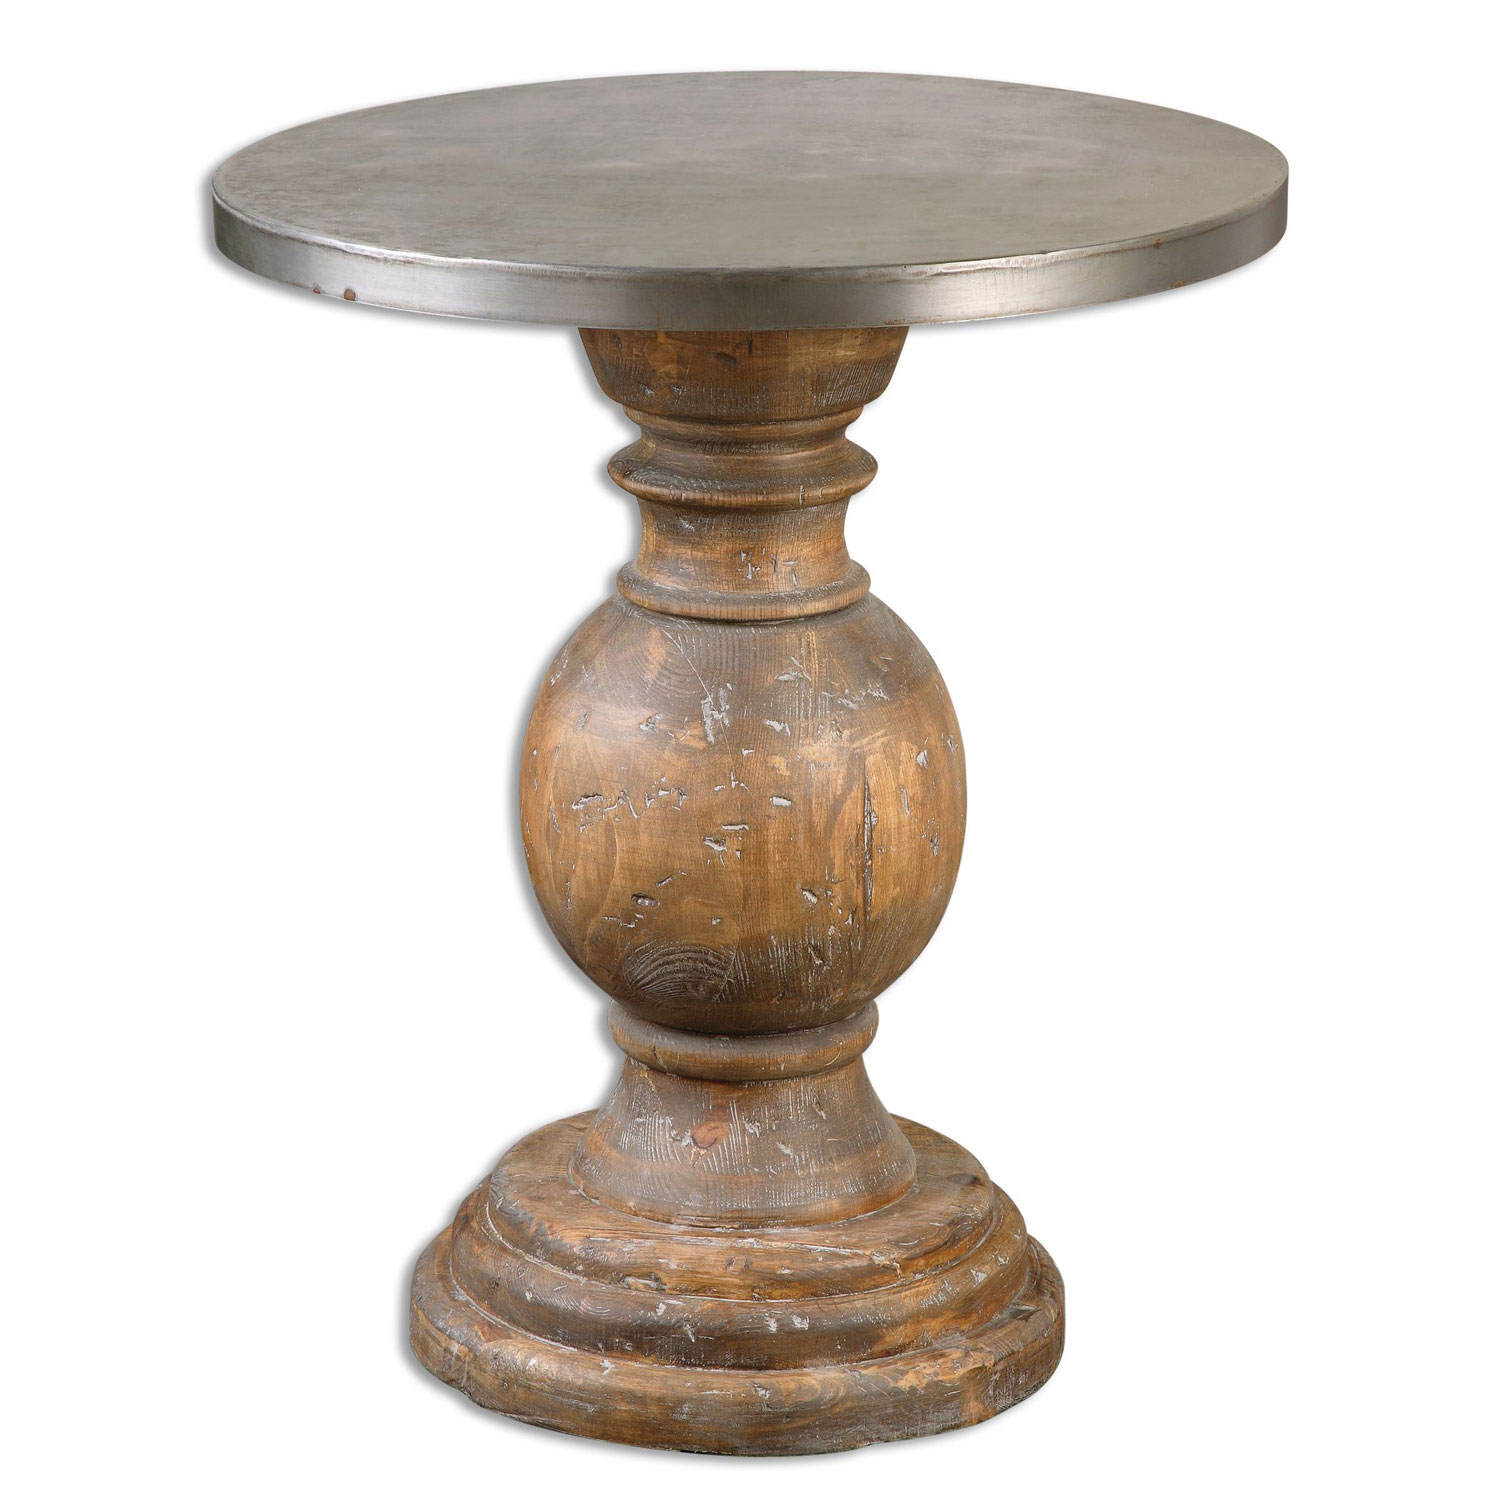 uttermost blythe reclaimed fir wood accent table bellacor round hover zoom pub height kitchen tufted furniture antique pedestal end bamboo nesting tables mission style lighting